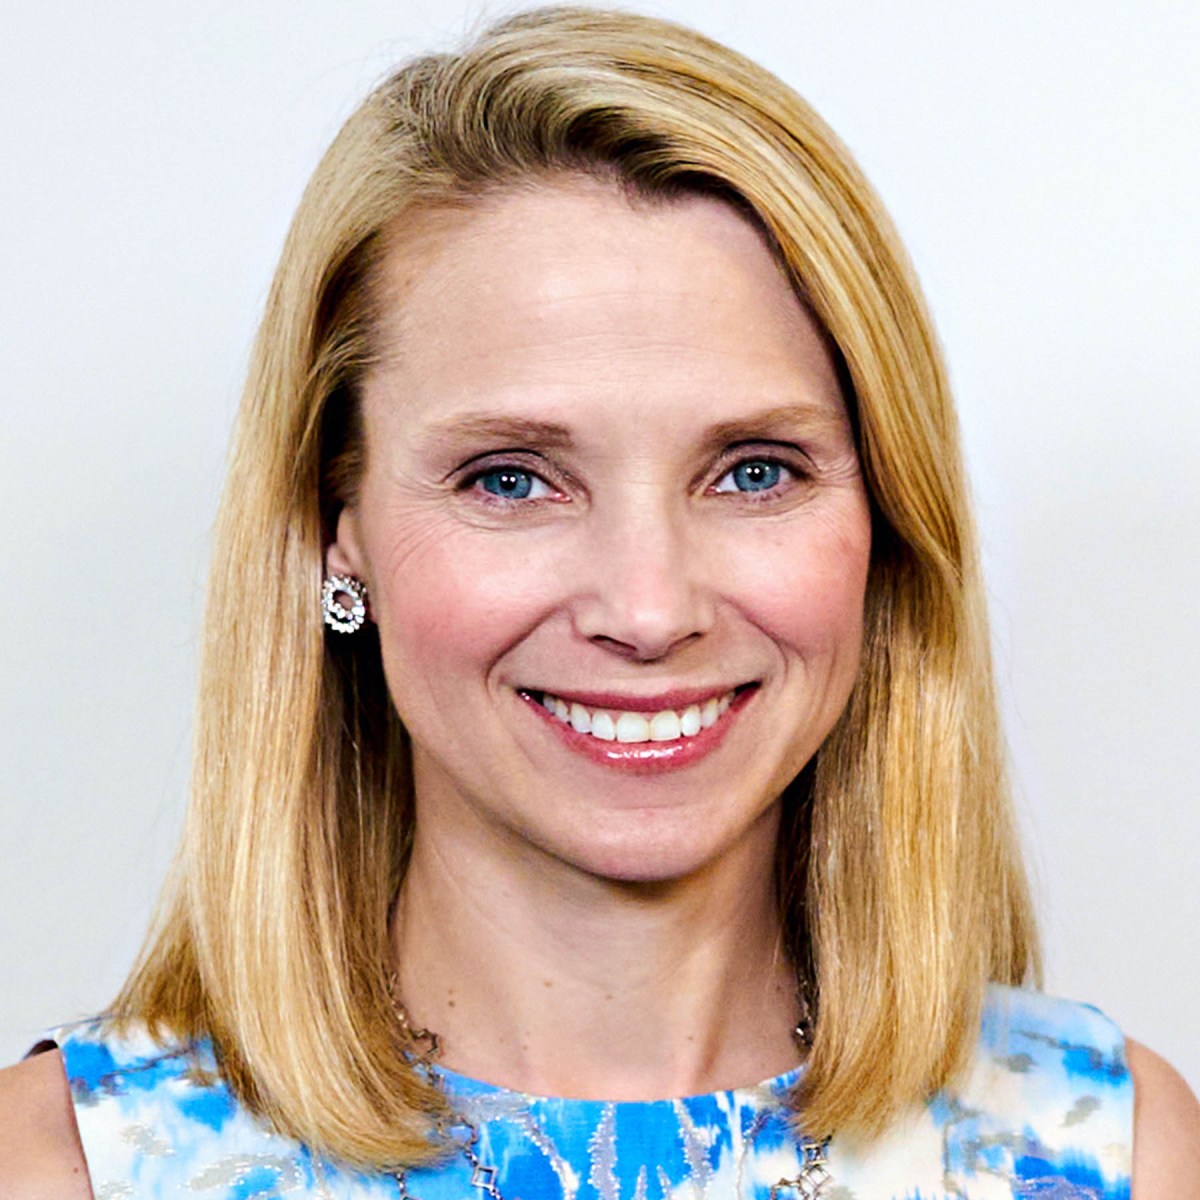 Marissa Mayer’s startup just rolled out apps for group photo sharing and event planning, and the internet isn’t sure what to think